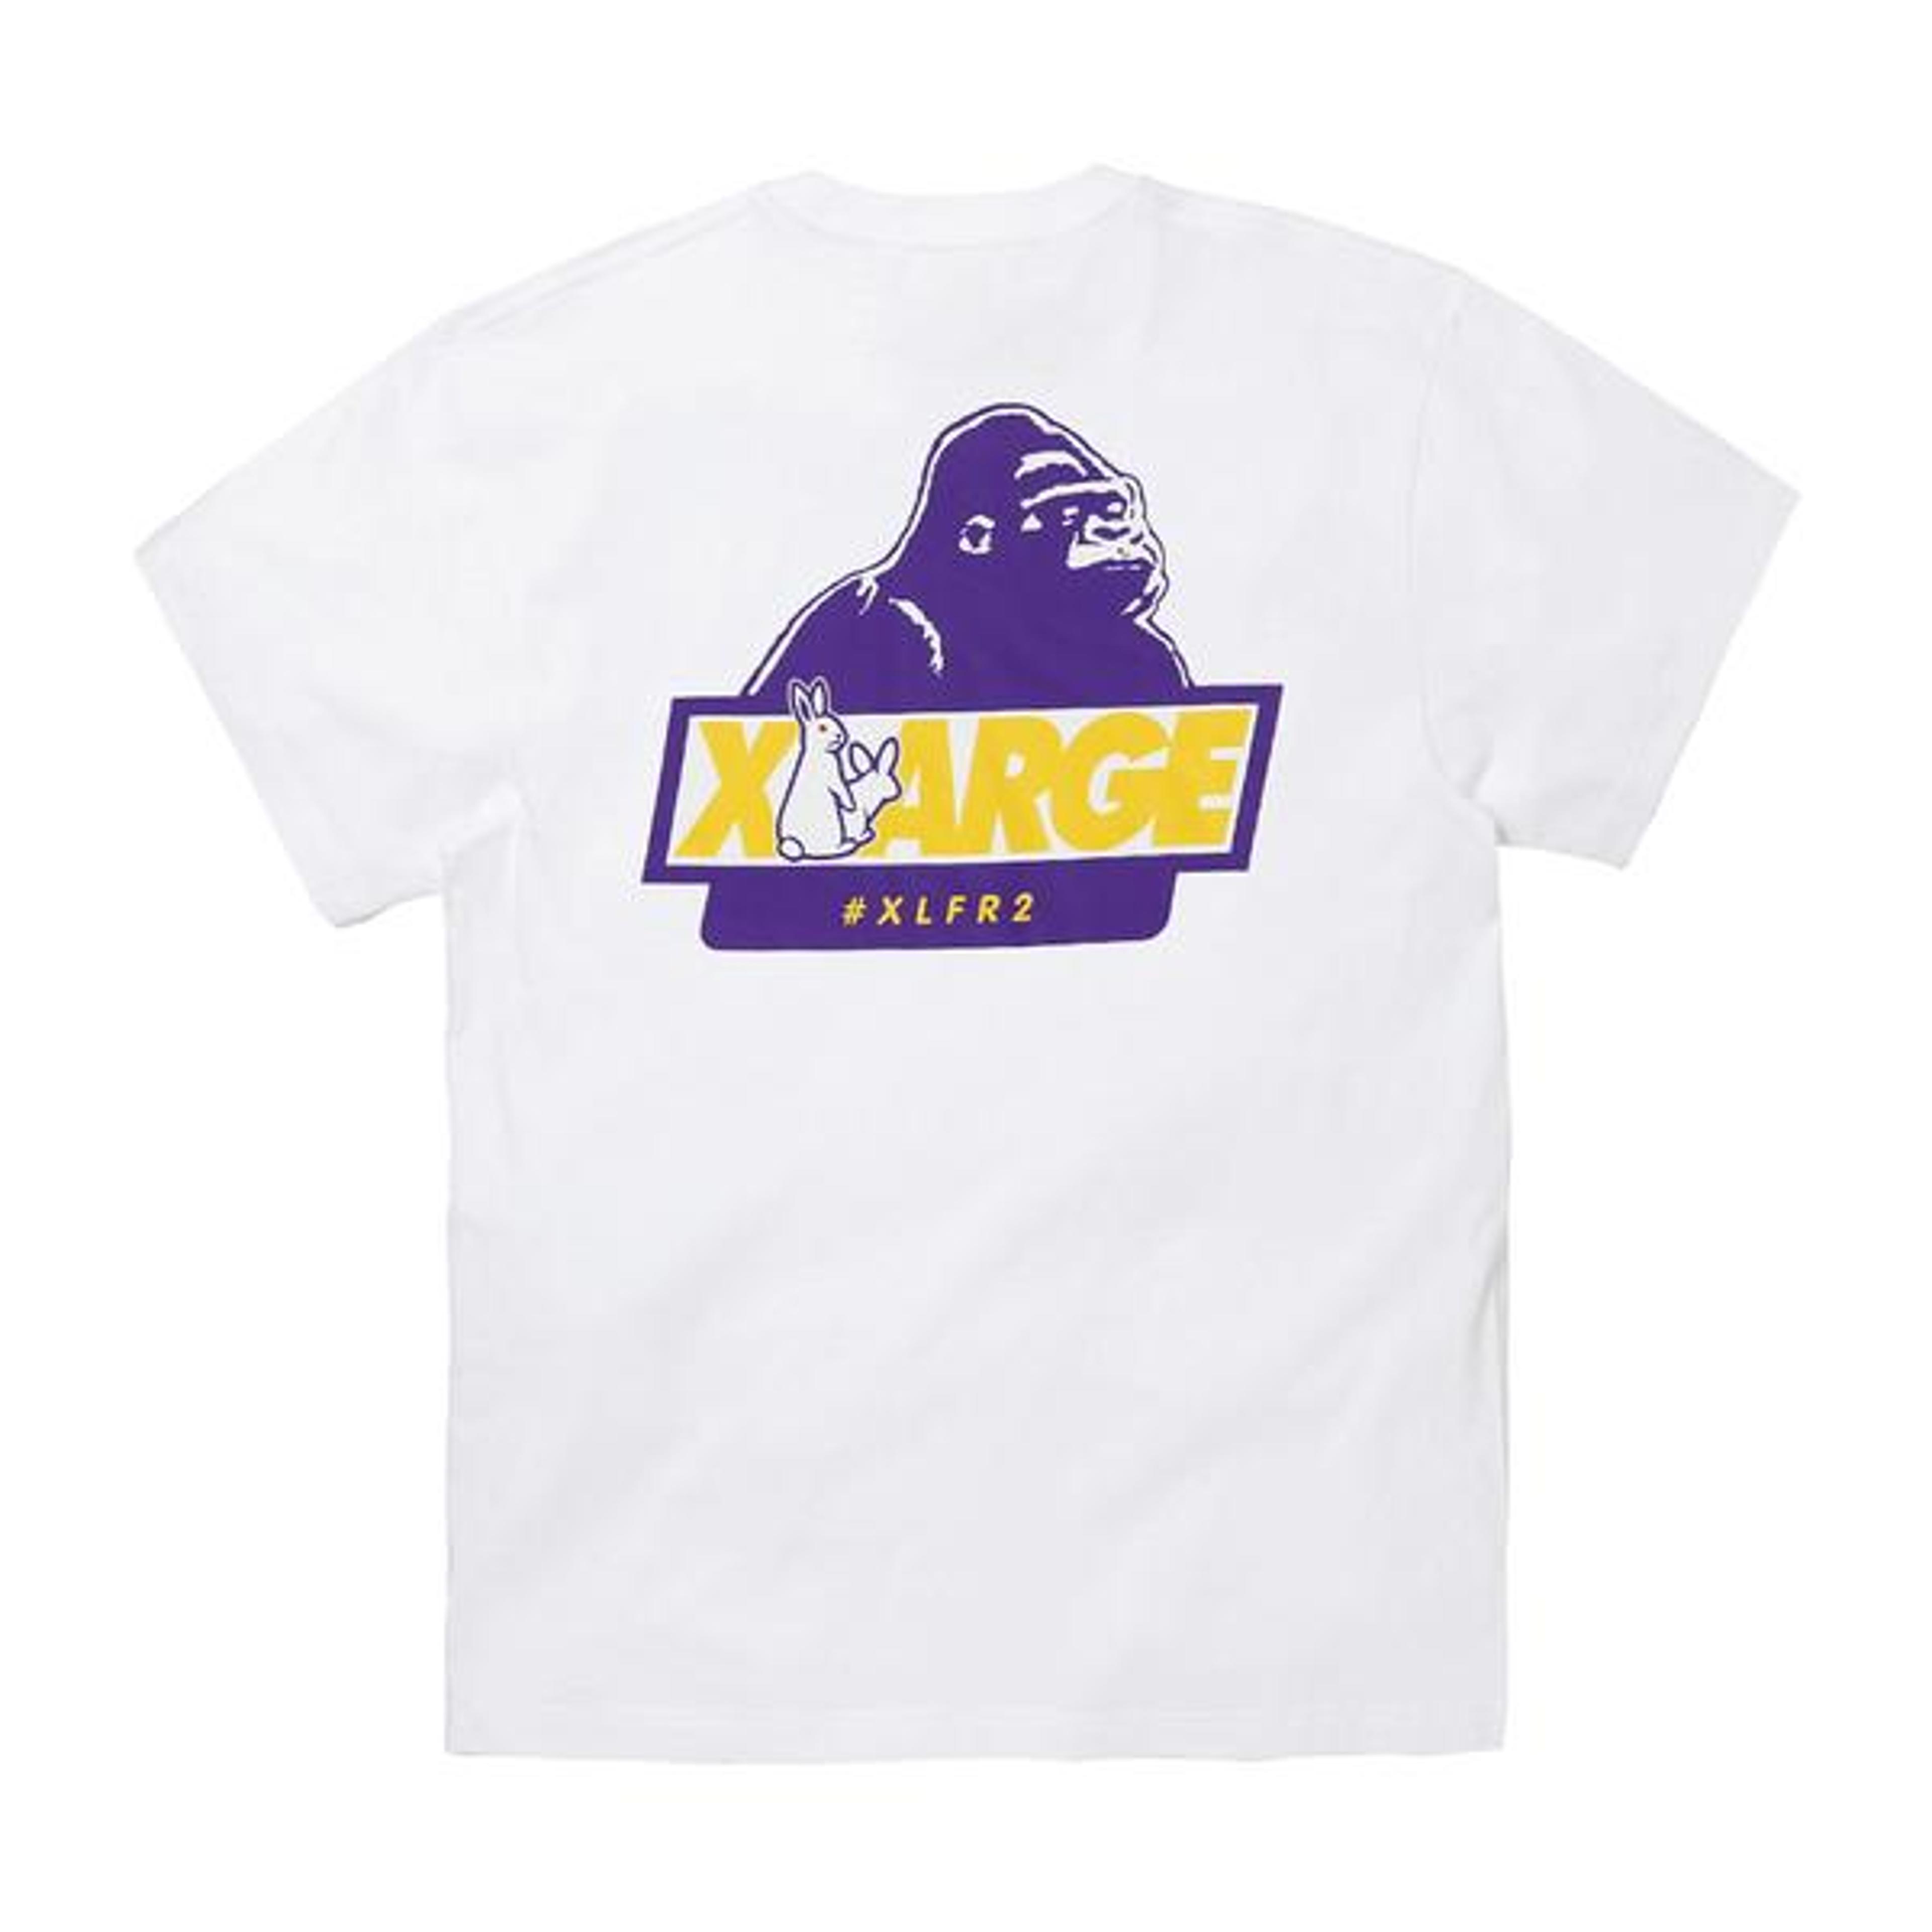 NTWRK - #FR2 XLARGE COLLABORATION WITH #FR2 ICON TEE-WHITE